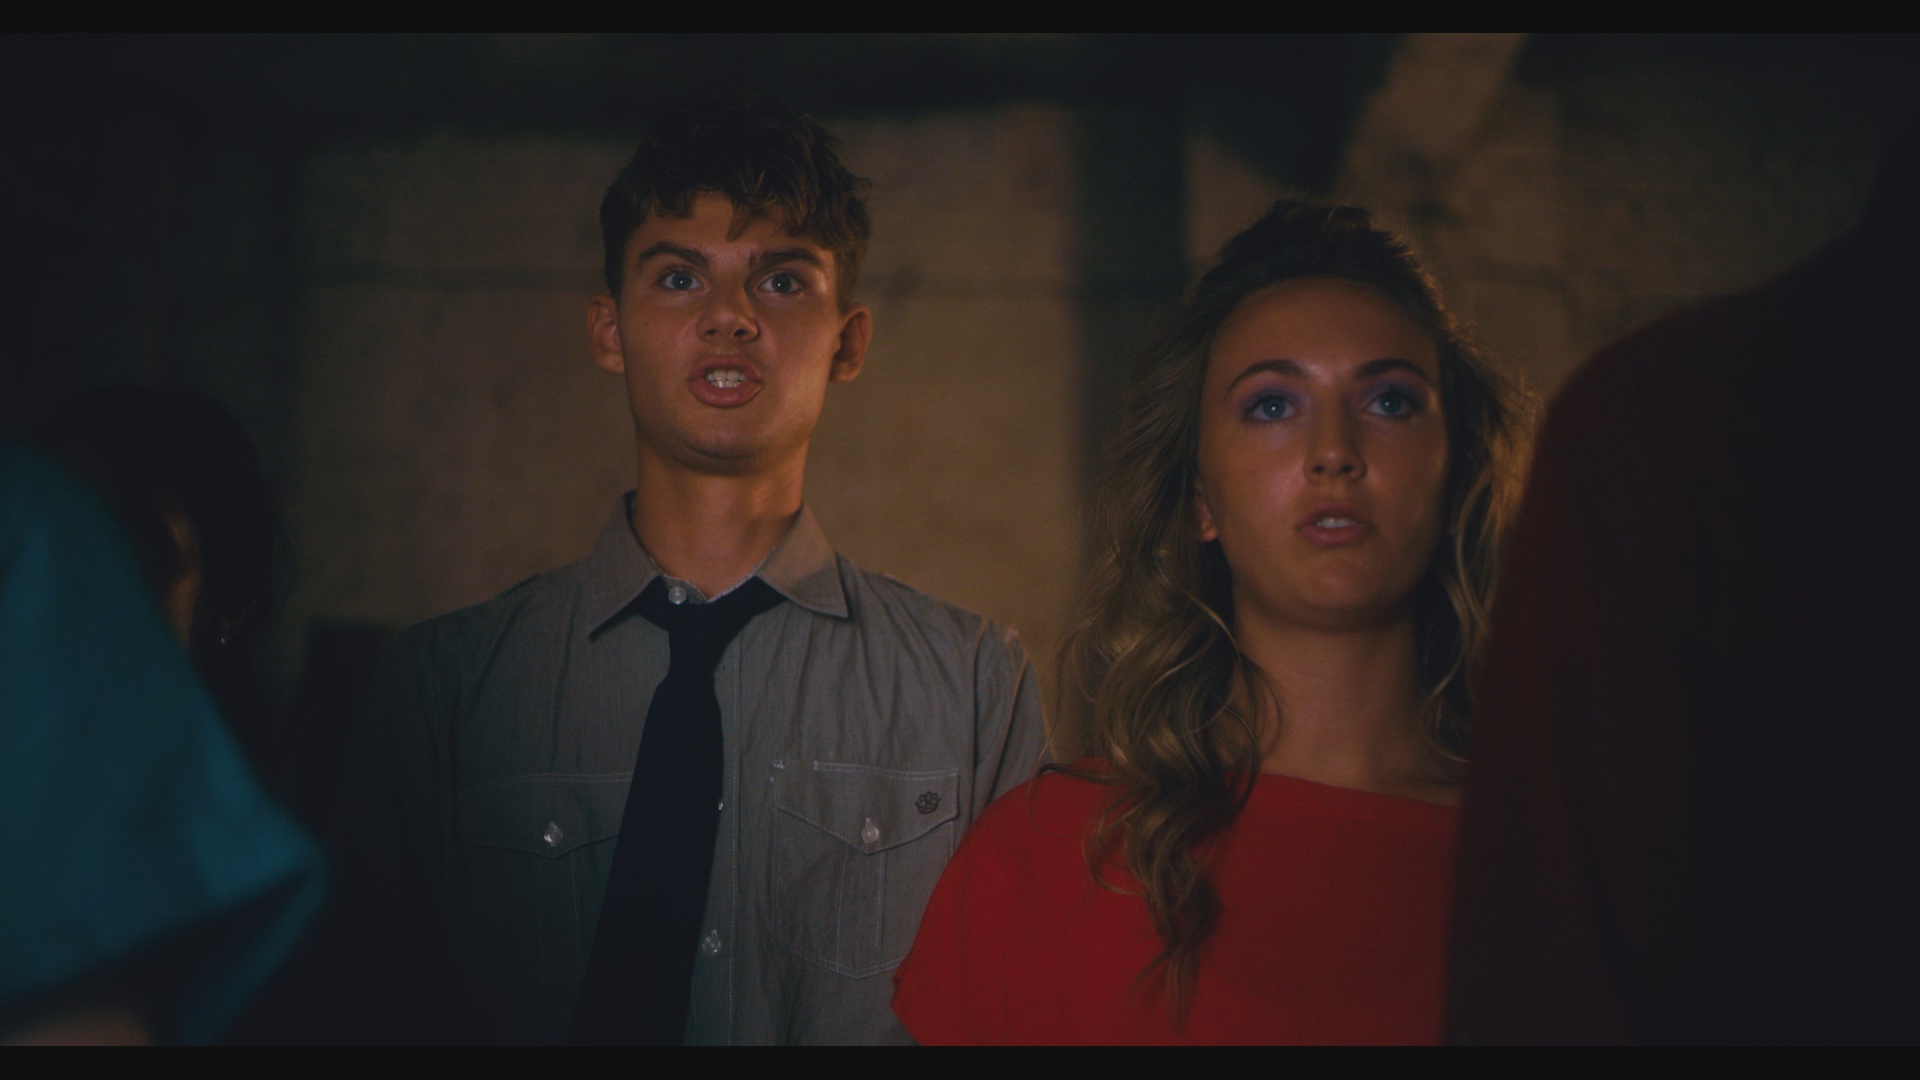 'Inherit the Witch', directed by Cradeaux Alexander & produced by Rohan Quine - still (161) - Max Dimitrov as Younger Cory, and Maddie Crofts as Jessie